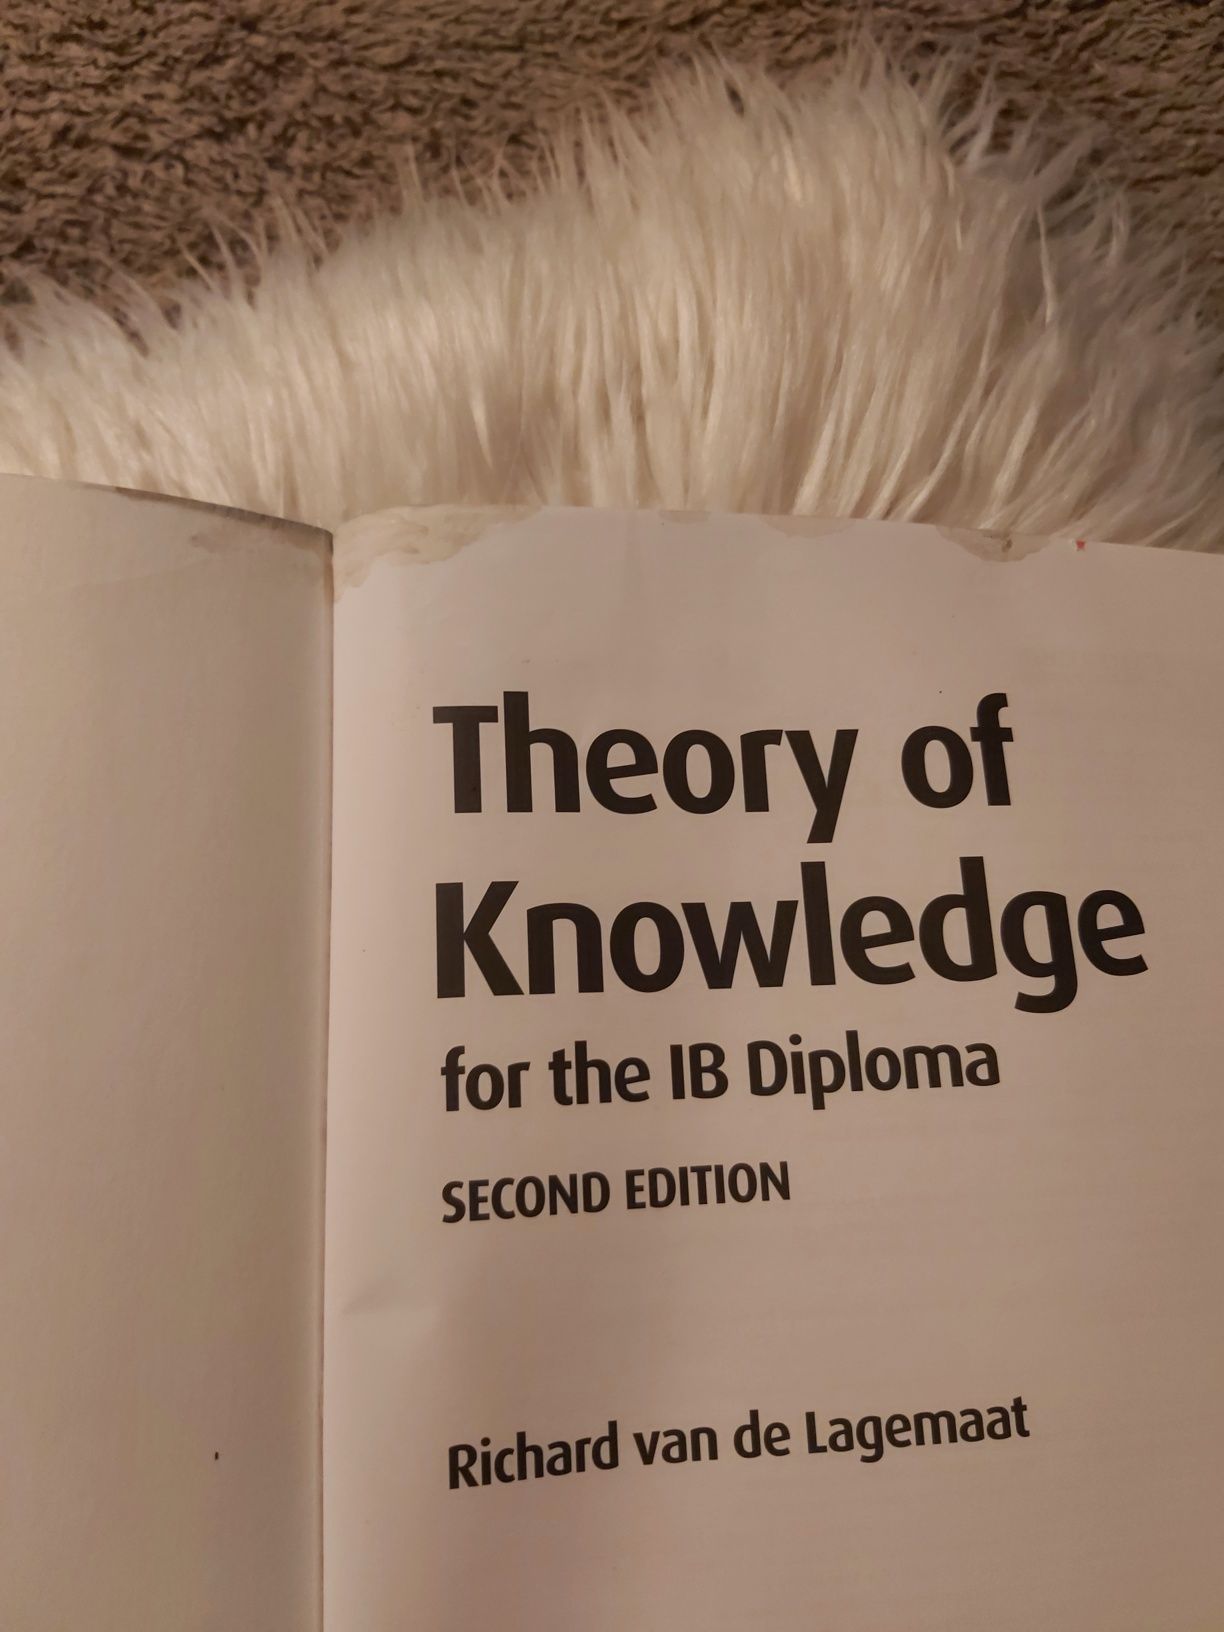 Theory of Knowledge for the IB diploma second edition